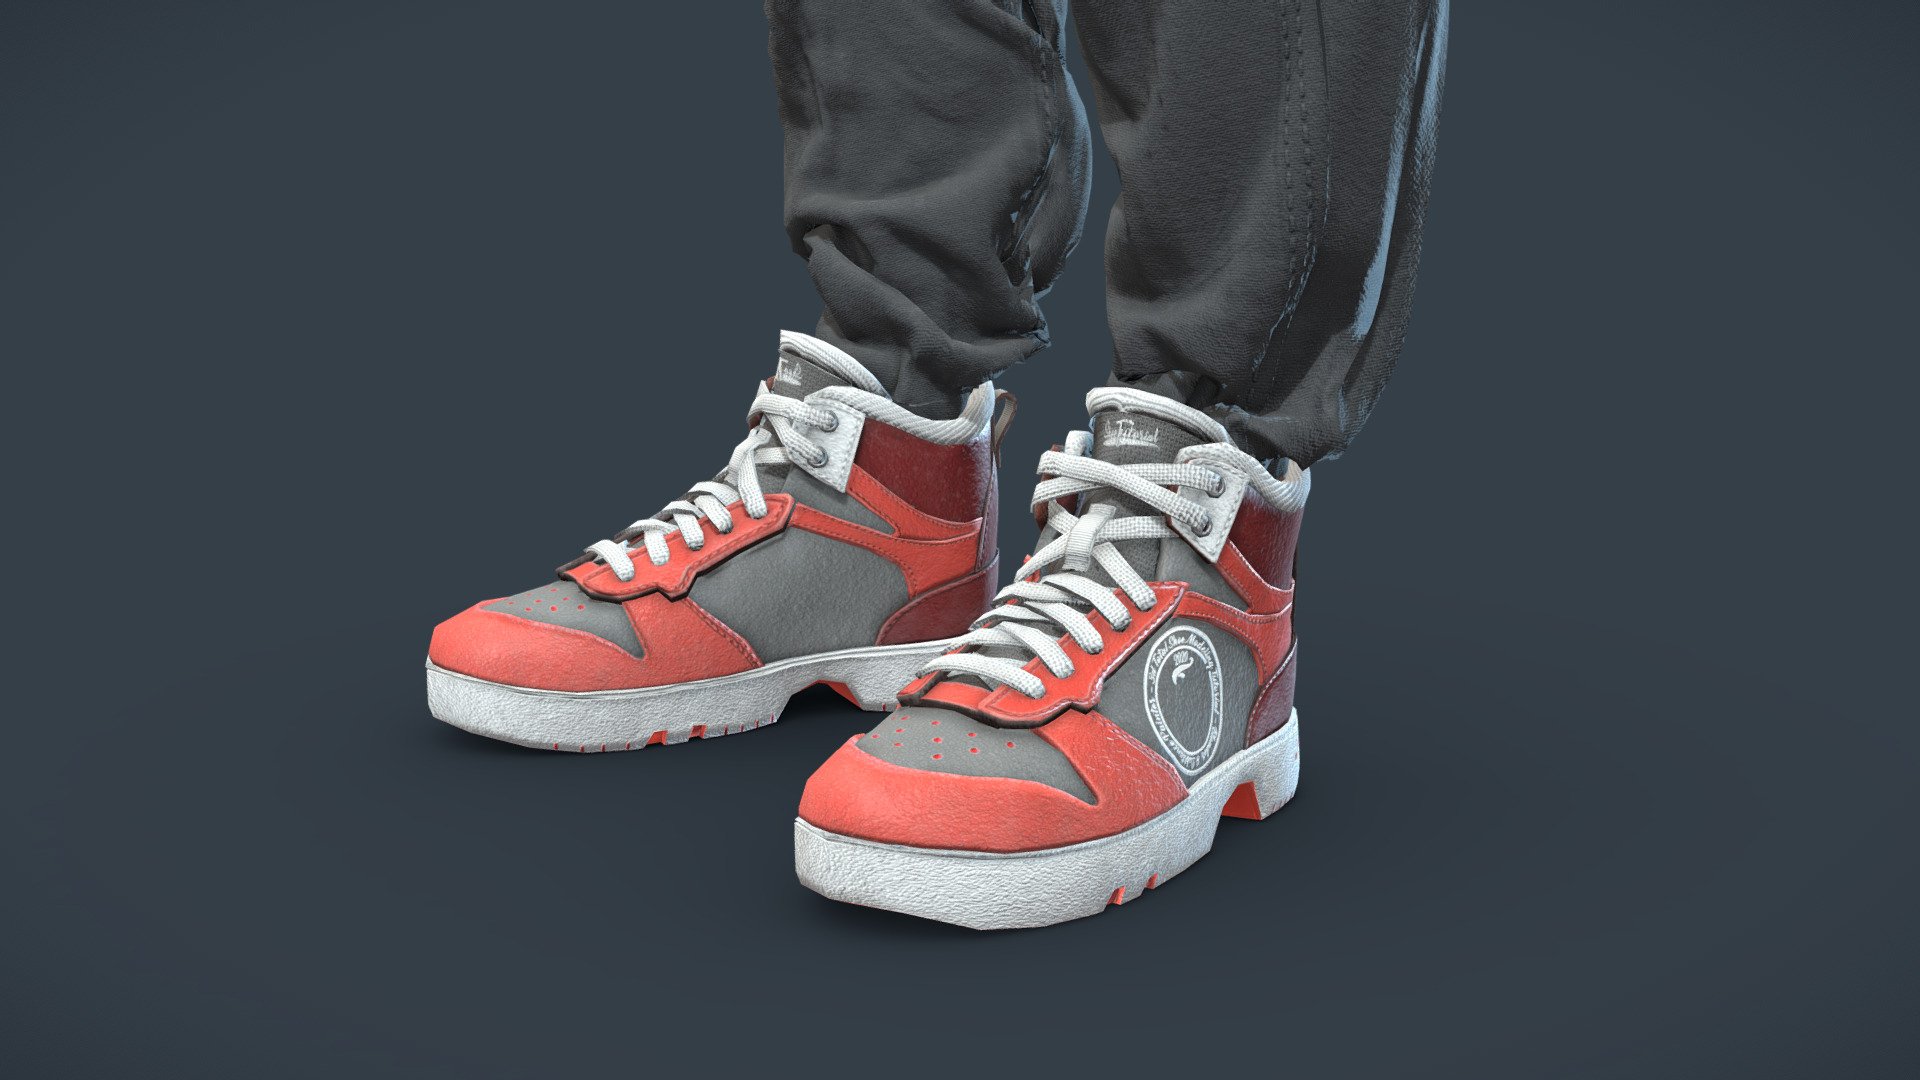 3D Sneakers created using Blender 2.8 and Substance Painter 3d model